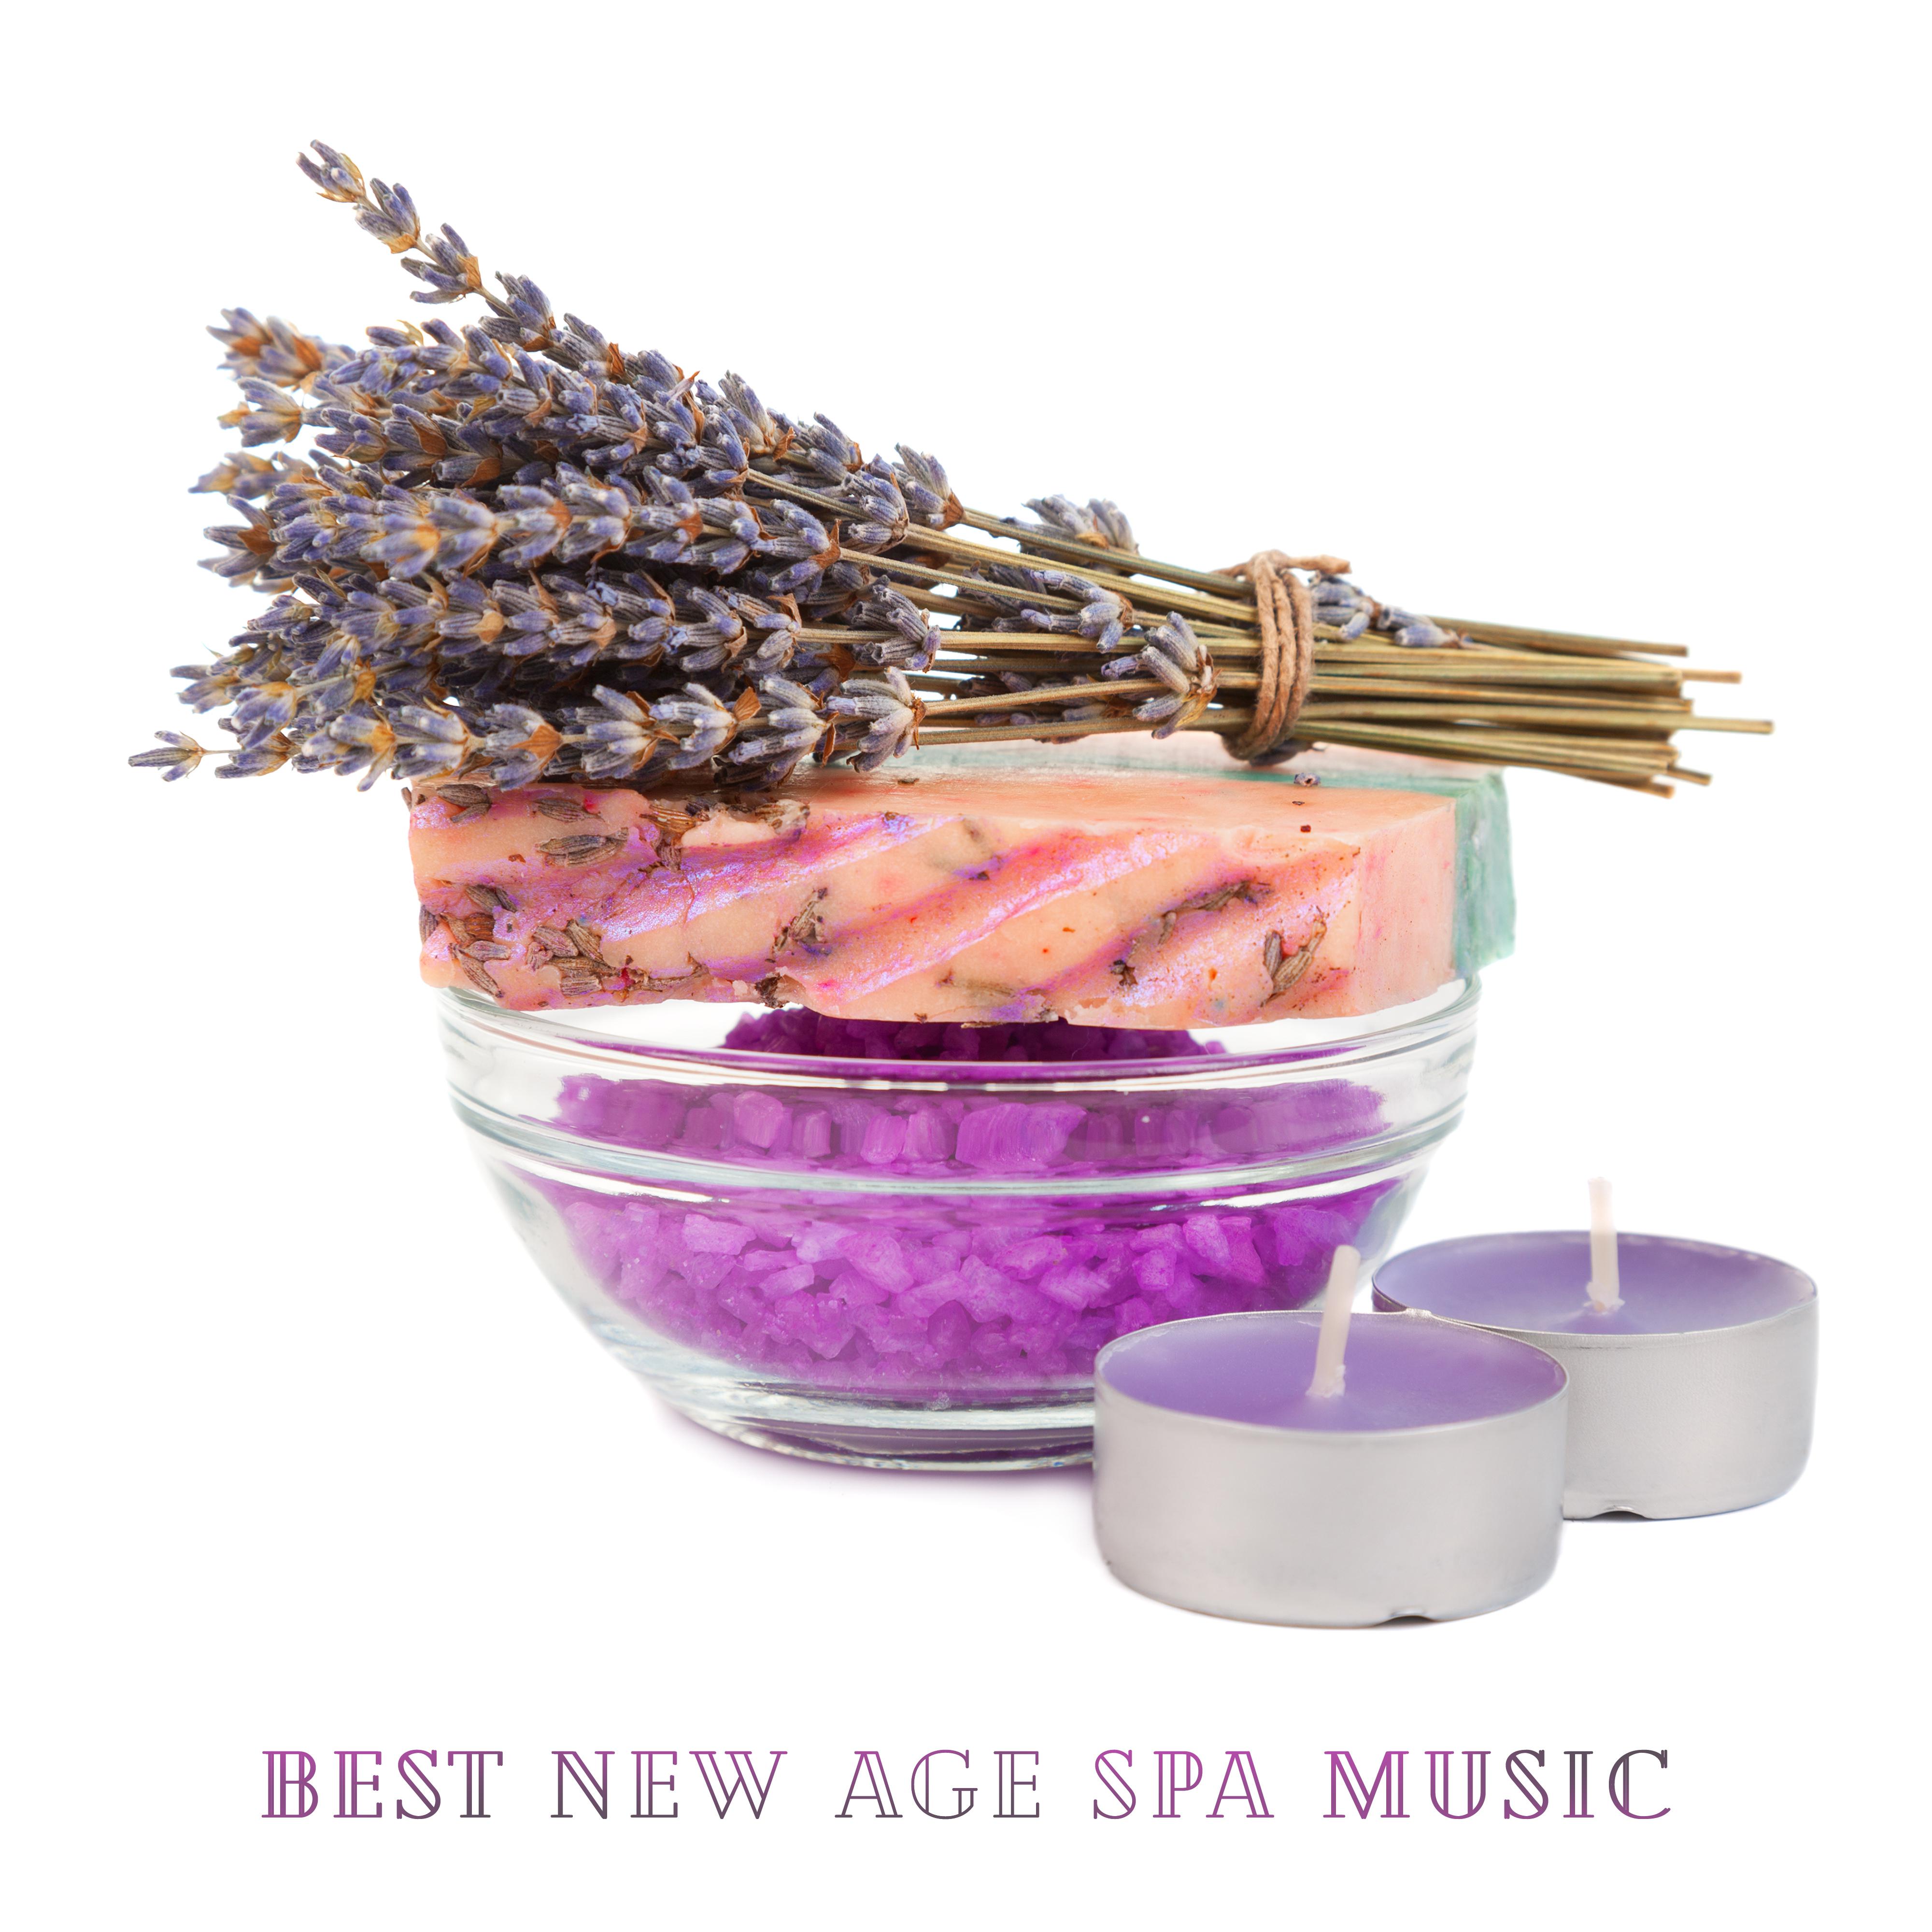 Best New Age Spa Music